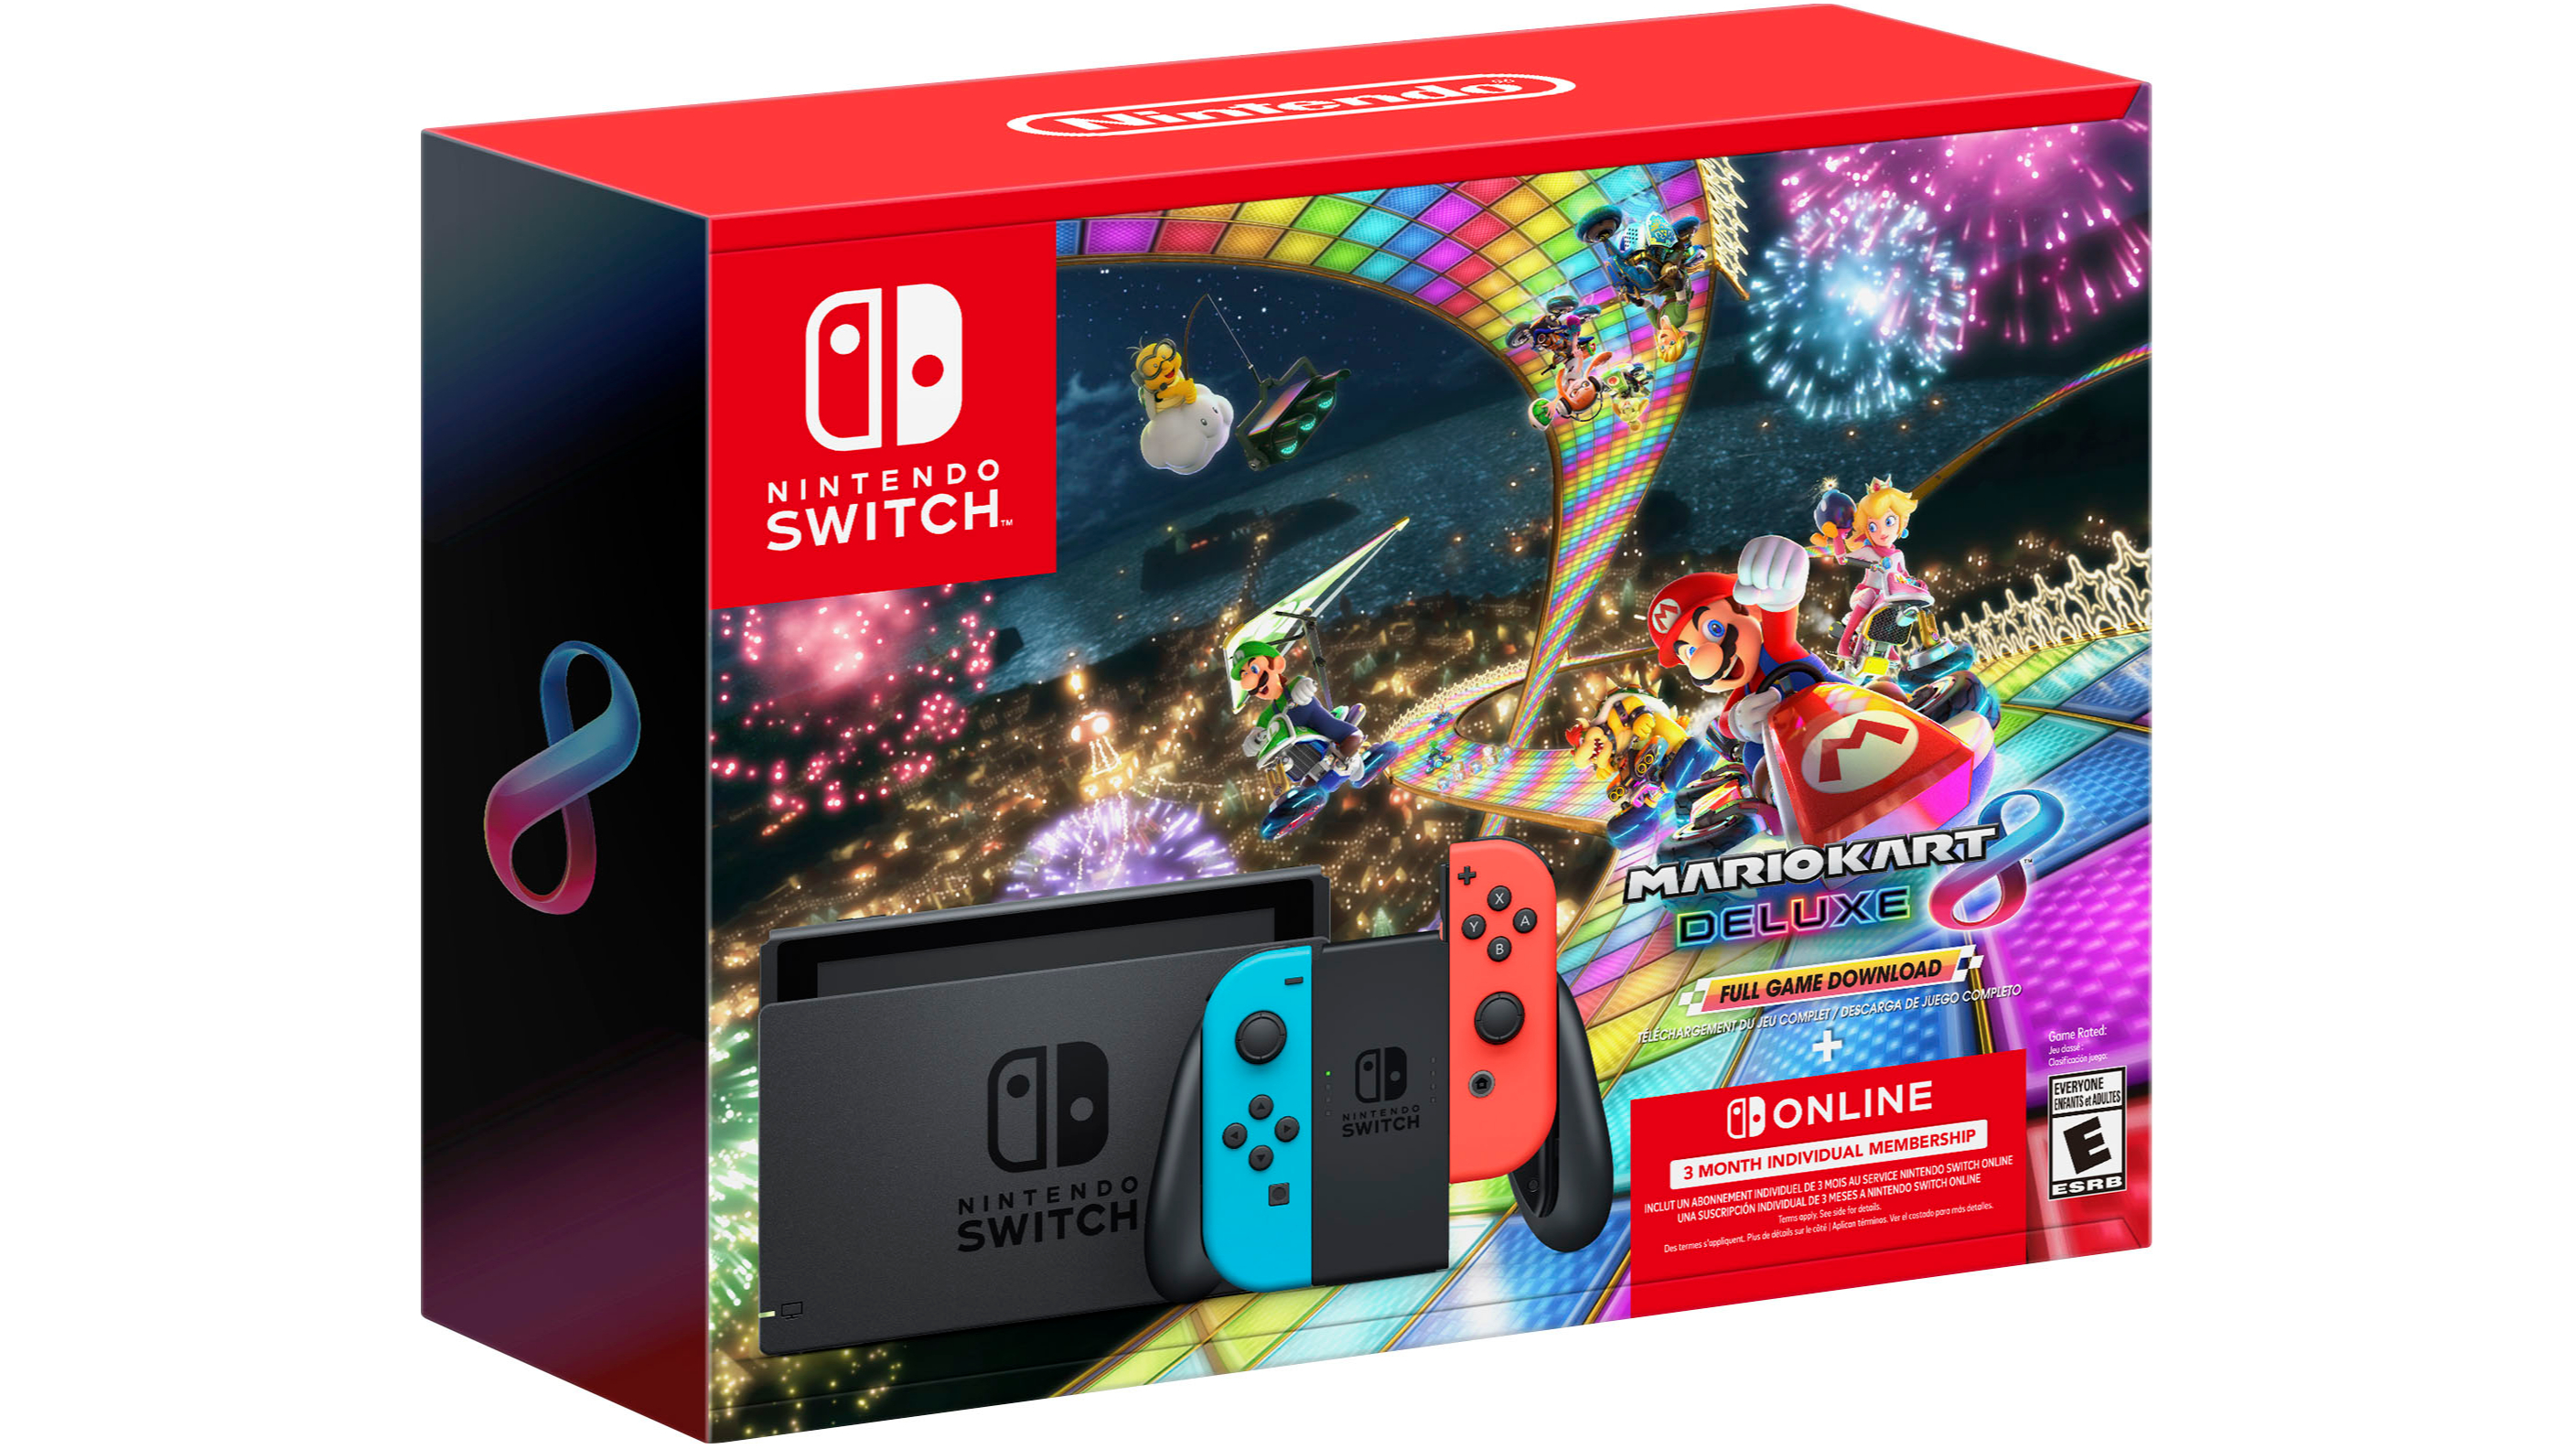 Switch Black Friday deal